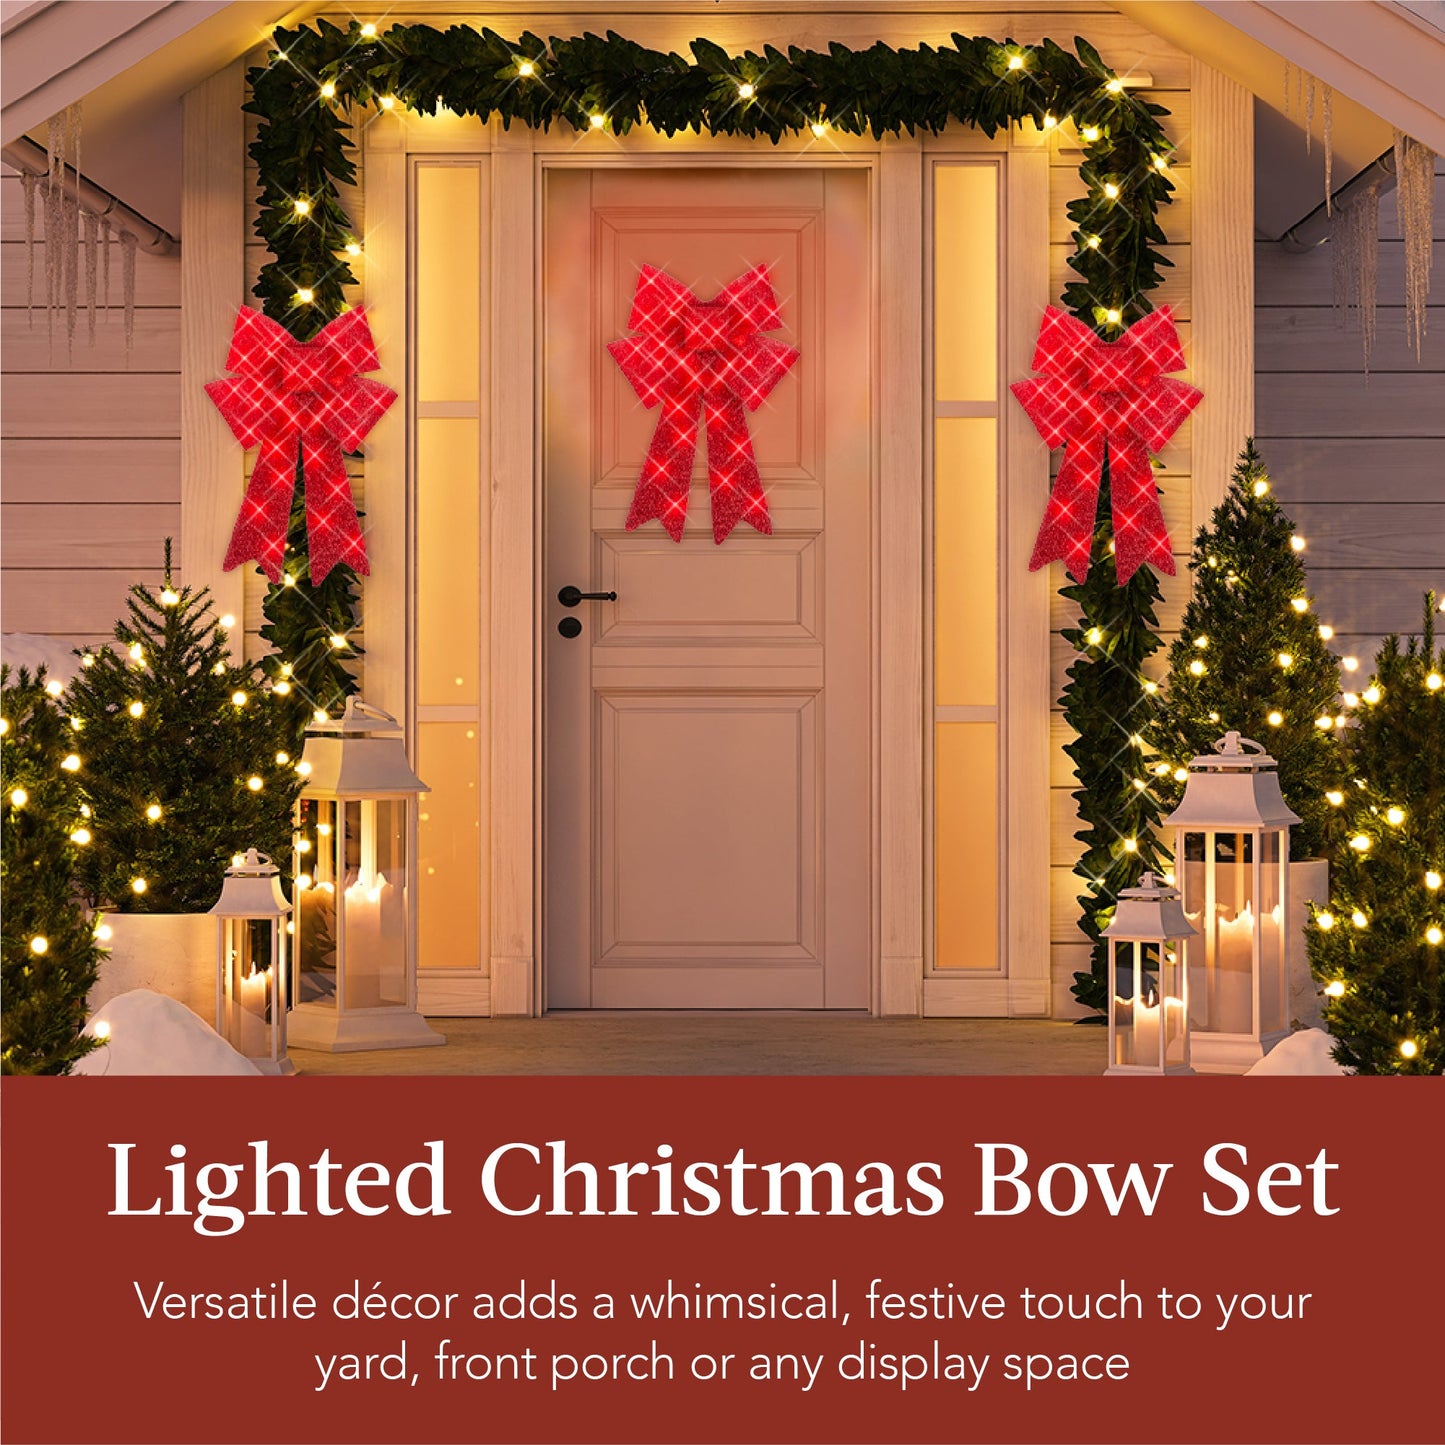 Set of 3 Pre-Lit Christmas Bow Decoration, LED Holiday Decor w/ 8 Functions